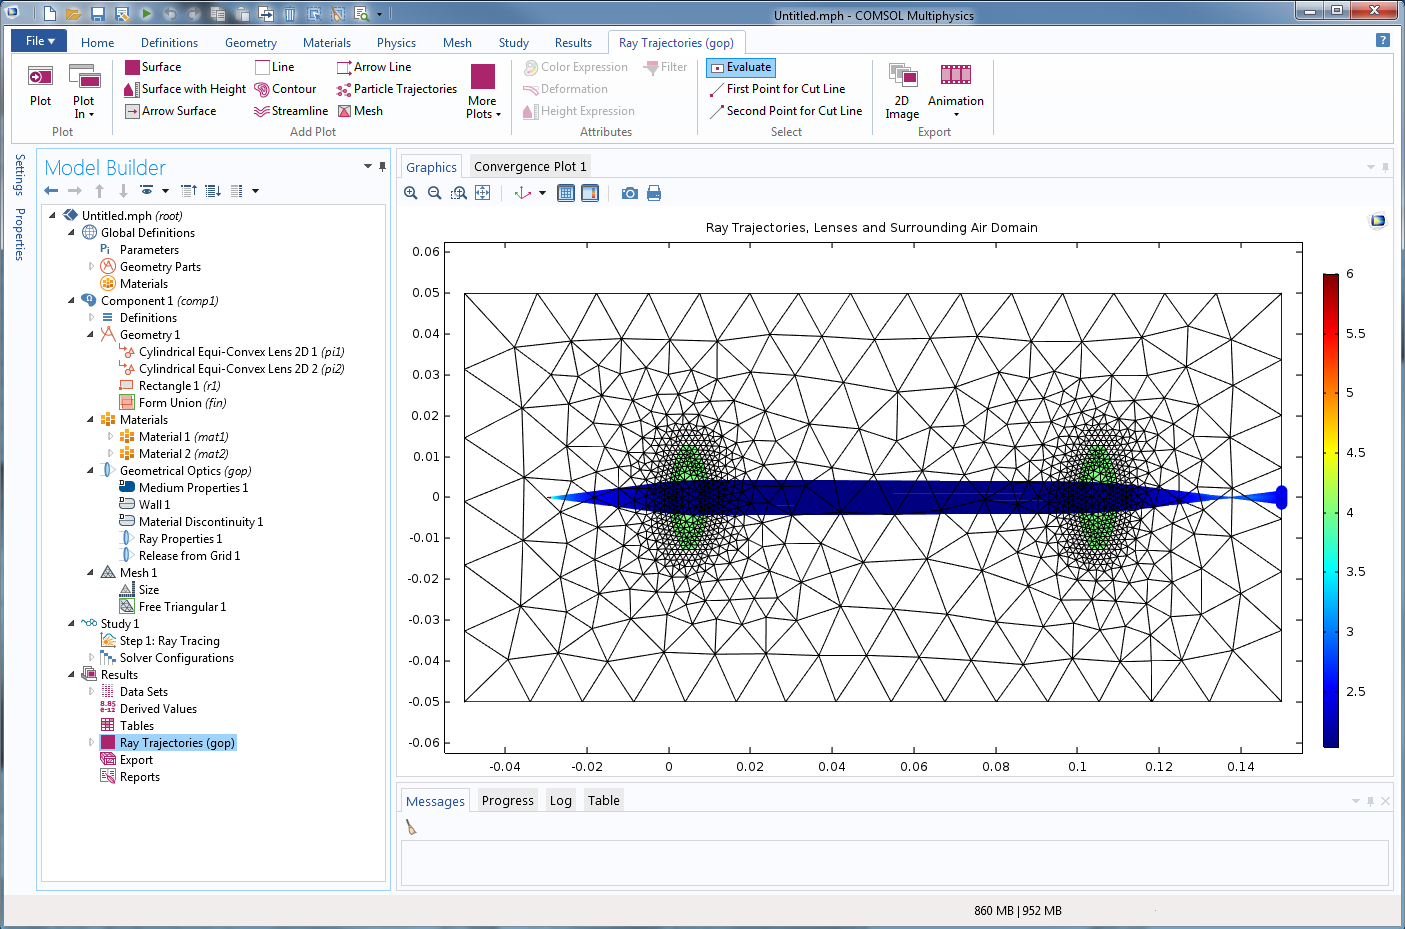 The simulation of a ray optics lens system in COMSOL Multiphysics version 5.2.